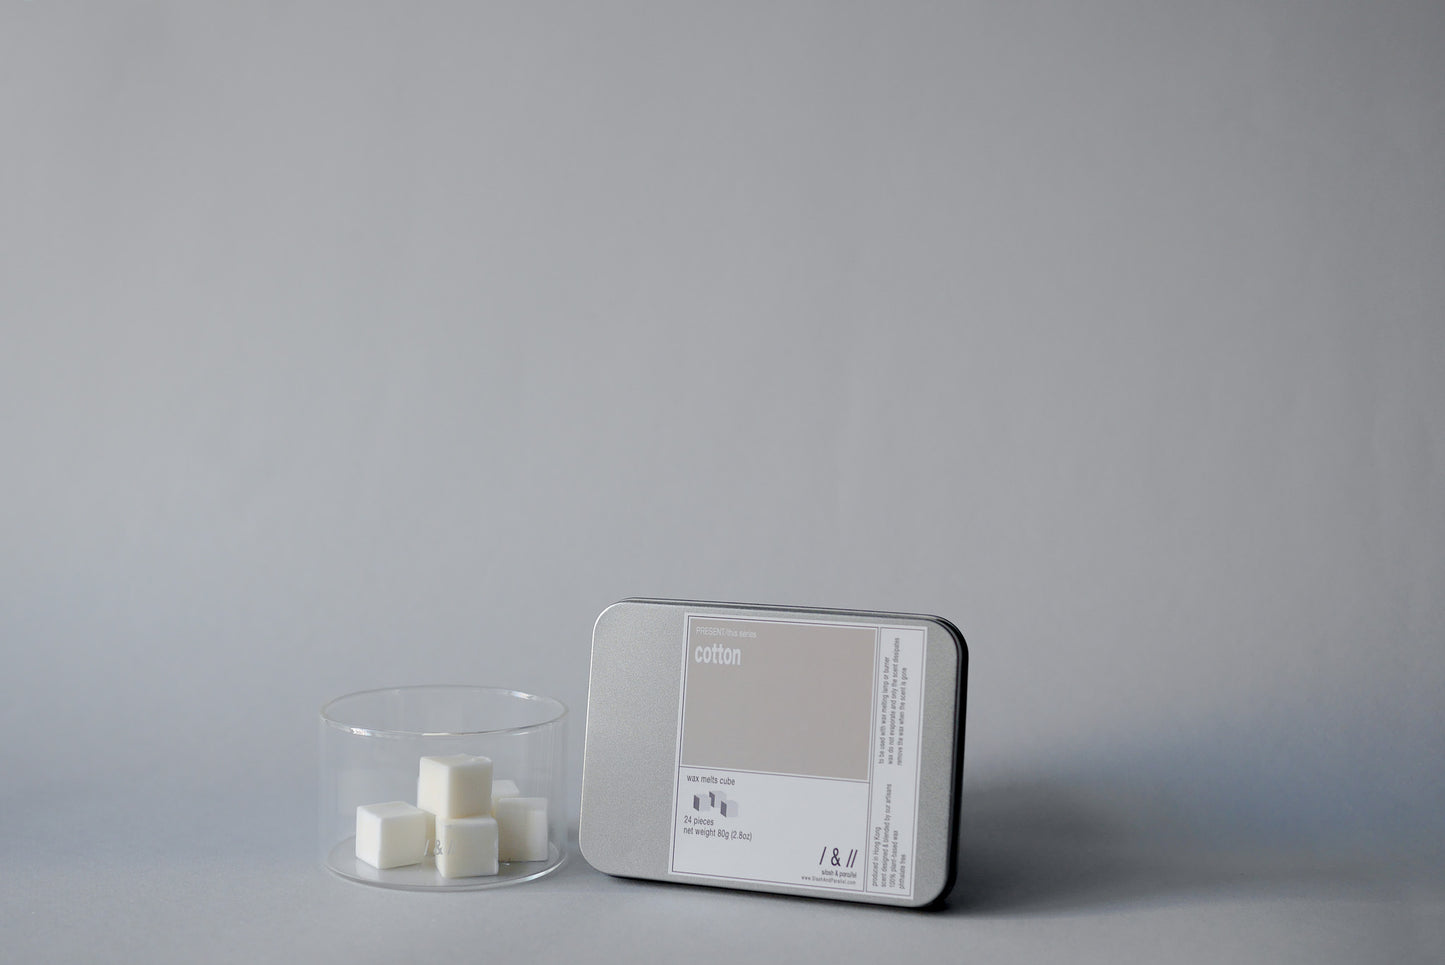 cotton / wax melts 80g // this series